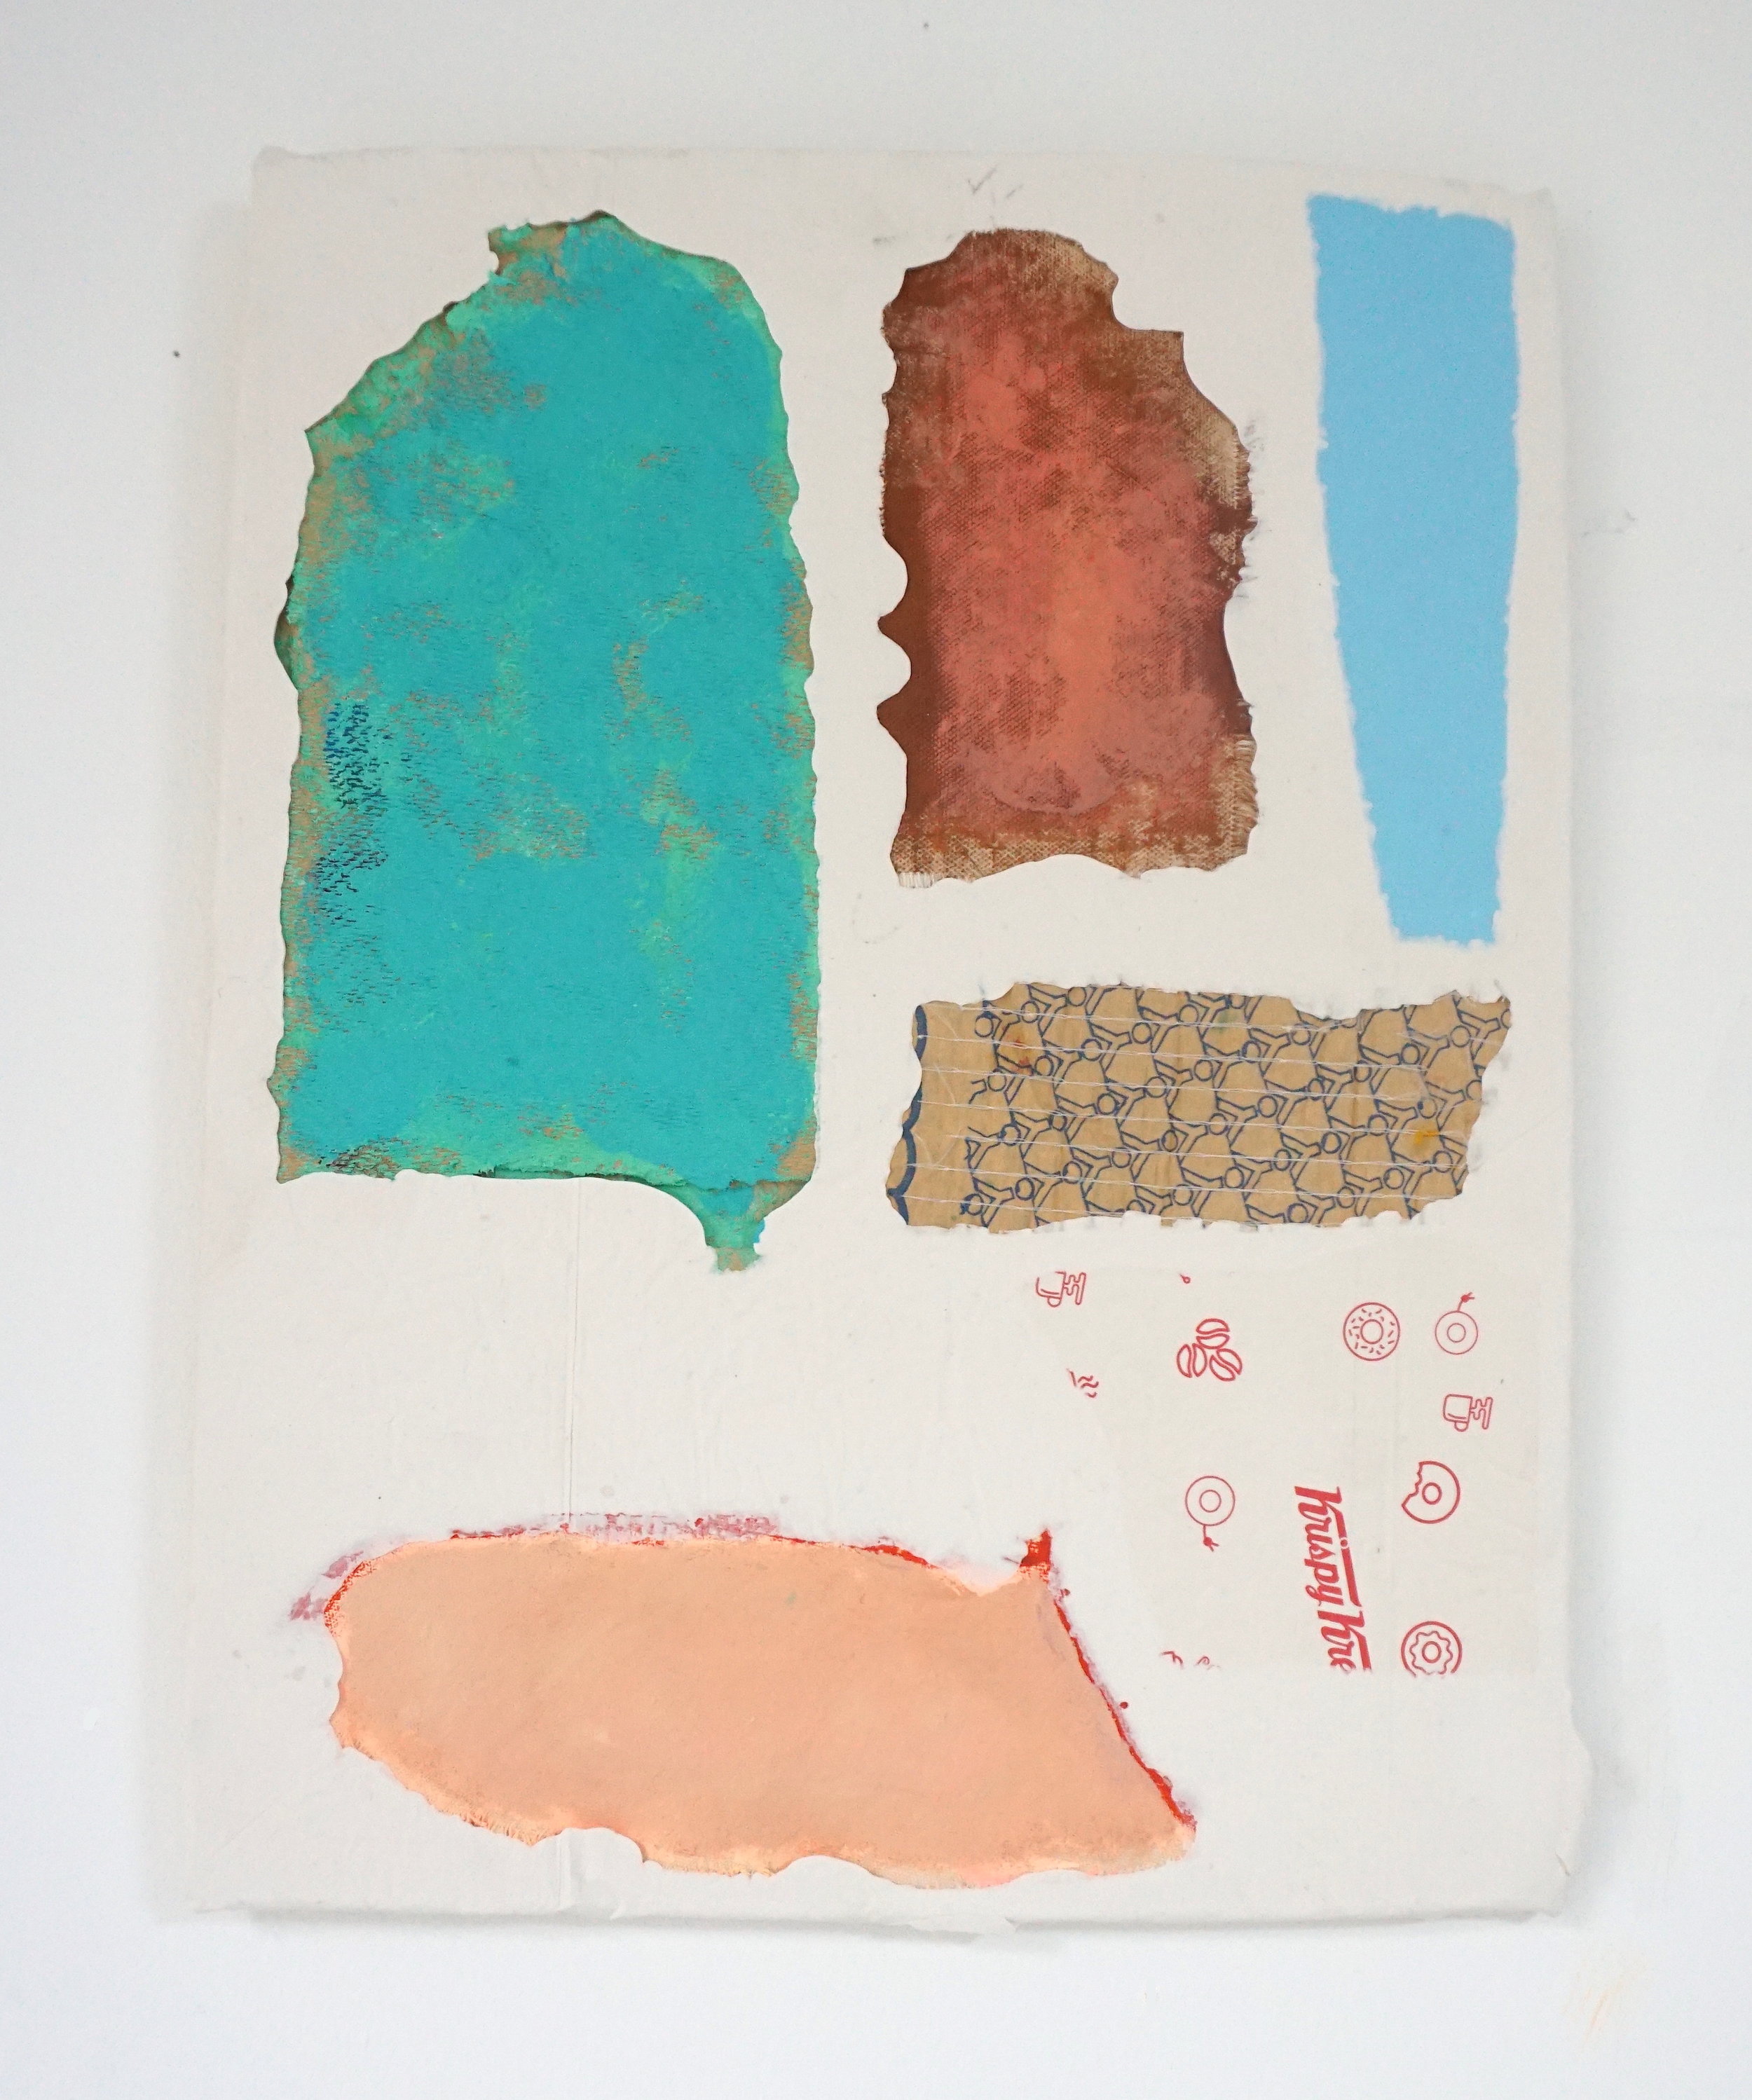 Untitled Fragment (canvas, found painted wood, carpet underlay, pvc, Krispy Kreme wrapper) | Composite and Mixed Media | 42 x 32 cm